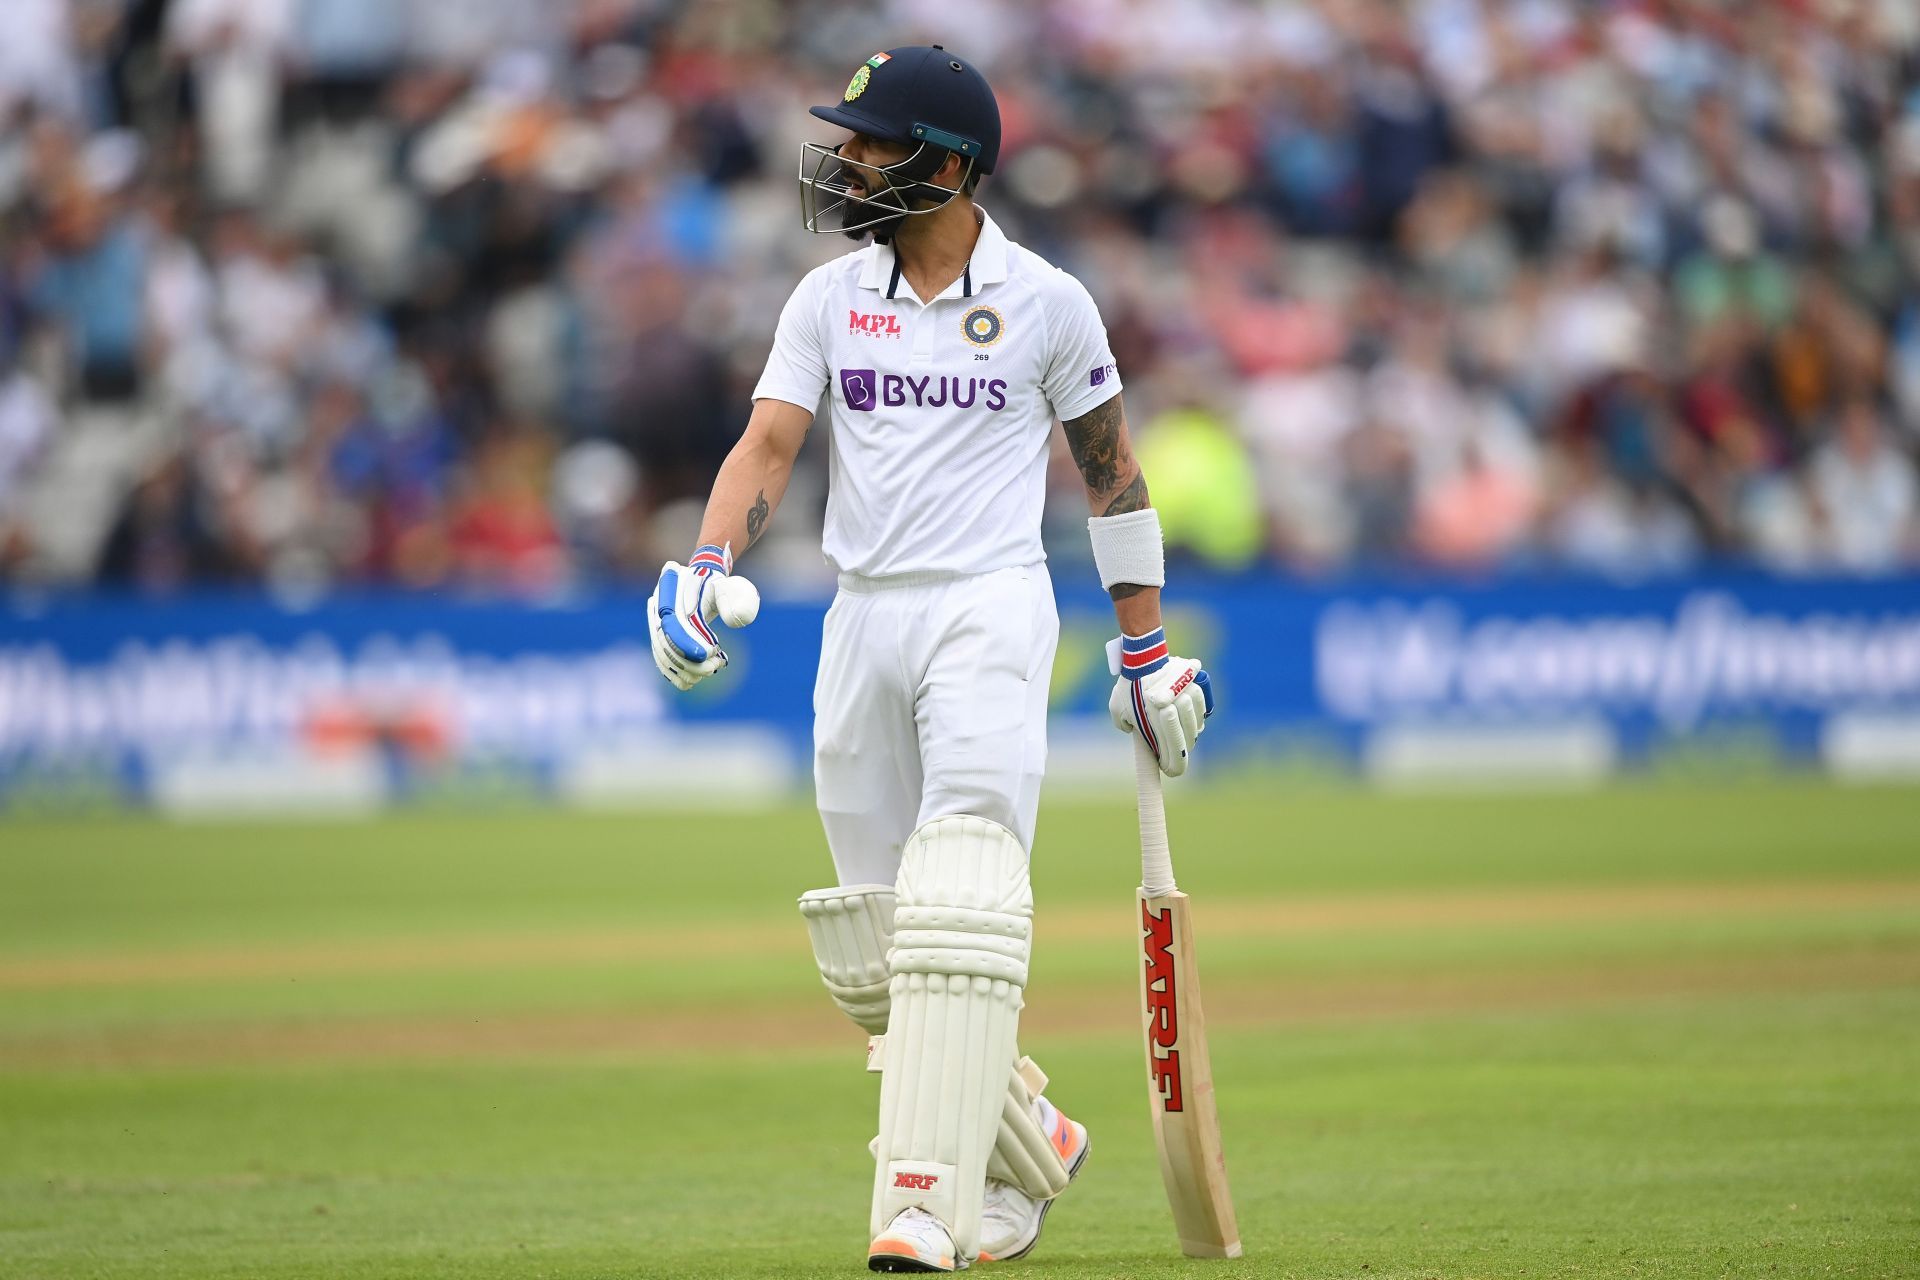 Virat Kohli fell victim to deliveries outside the off stump in the Edgbaston Test as well